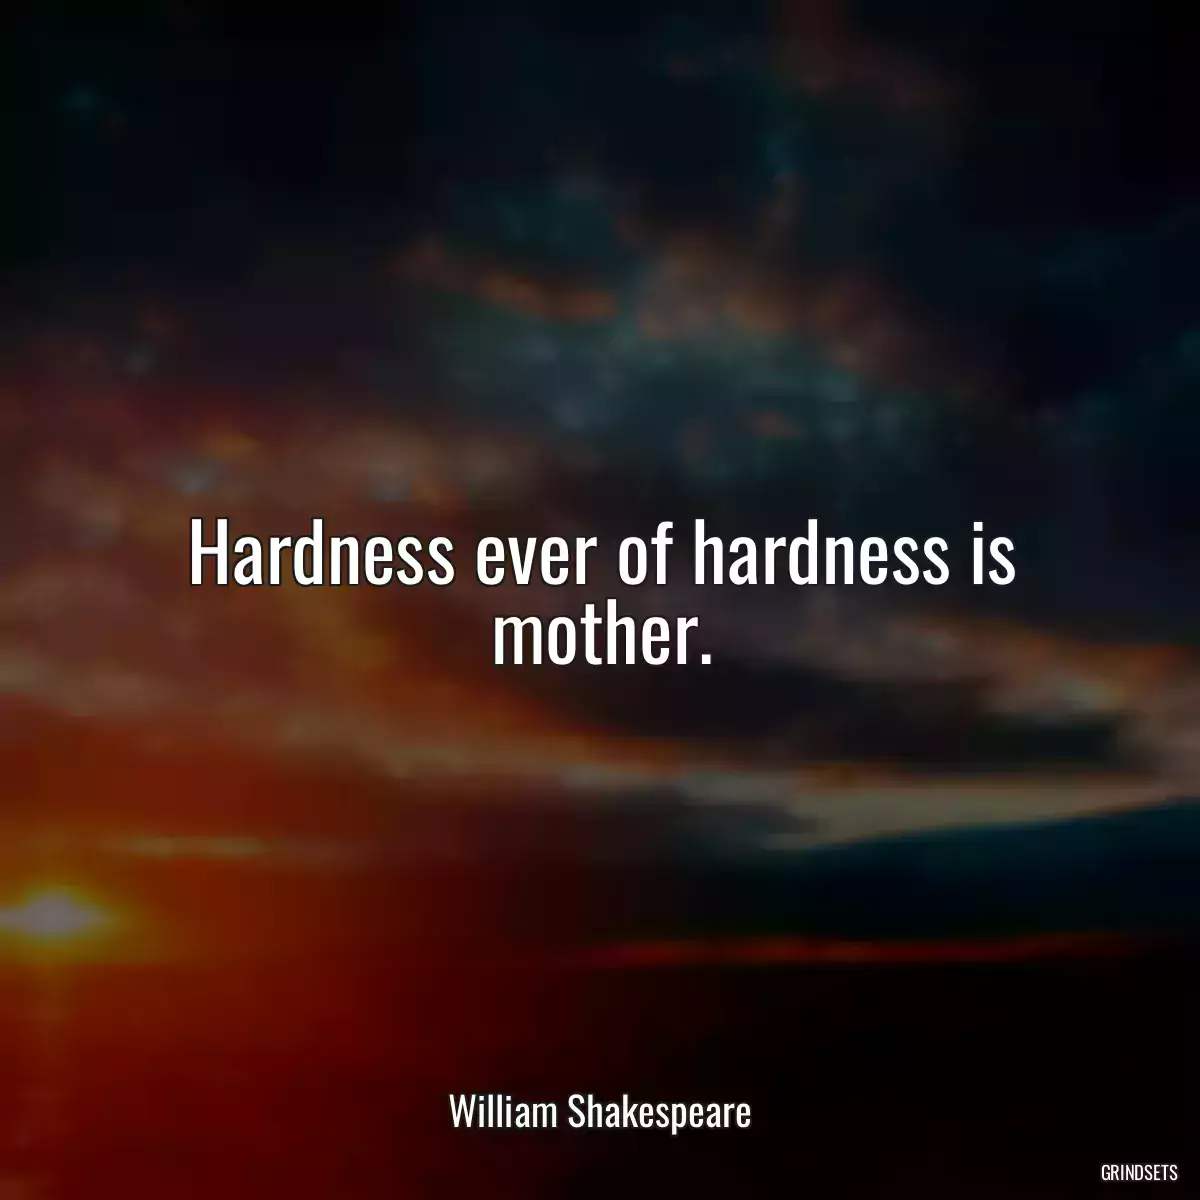 Hardness ever of hardness is mother.